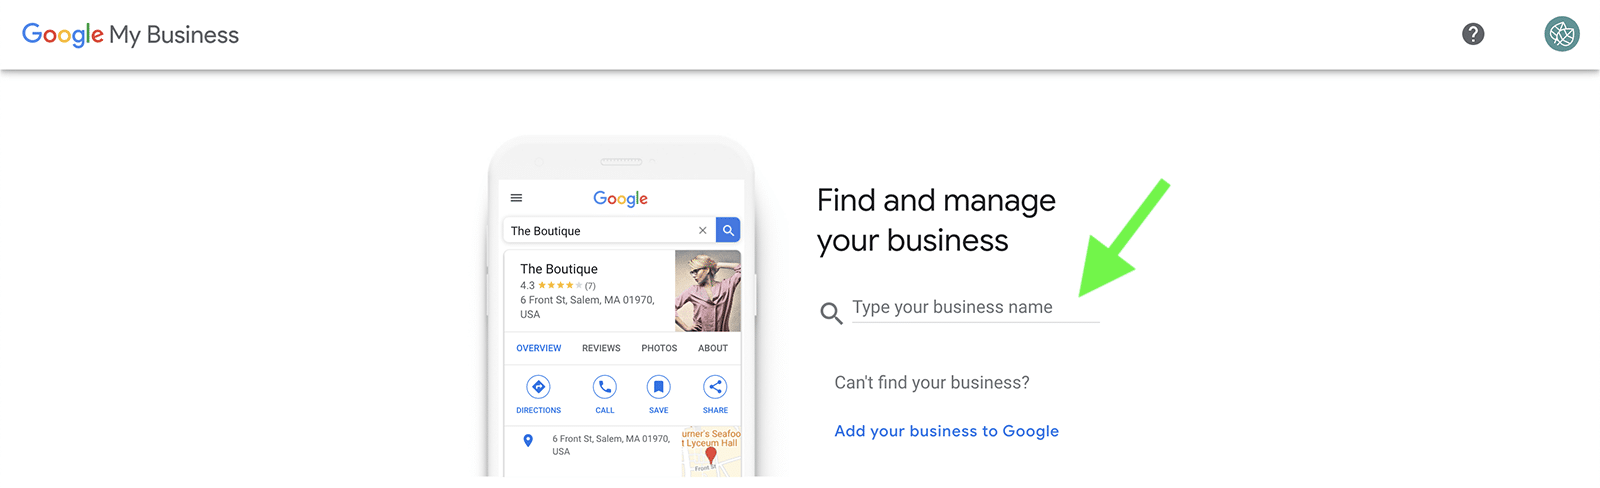 how to set up Google My Business - step 1